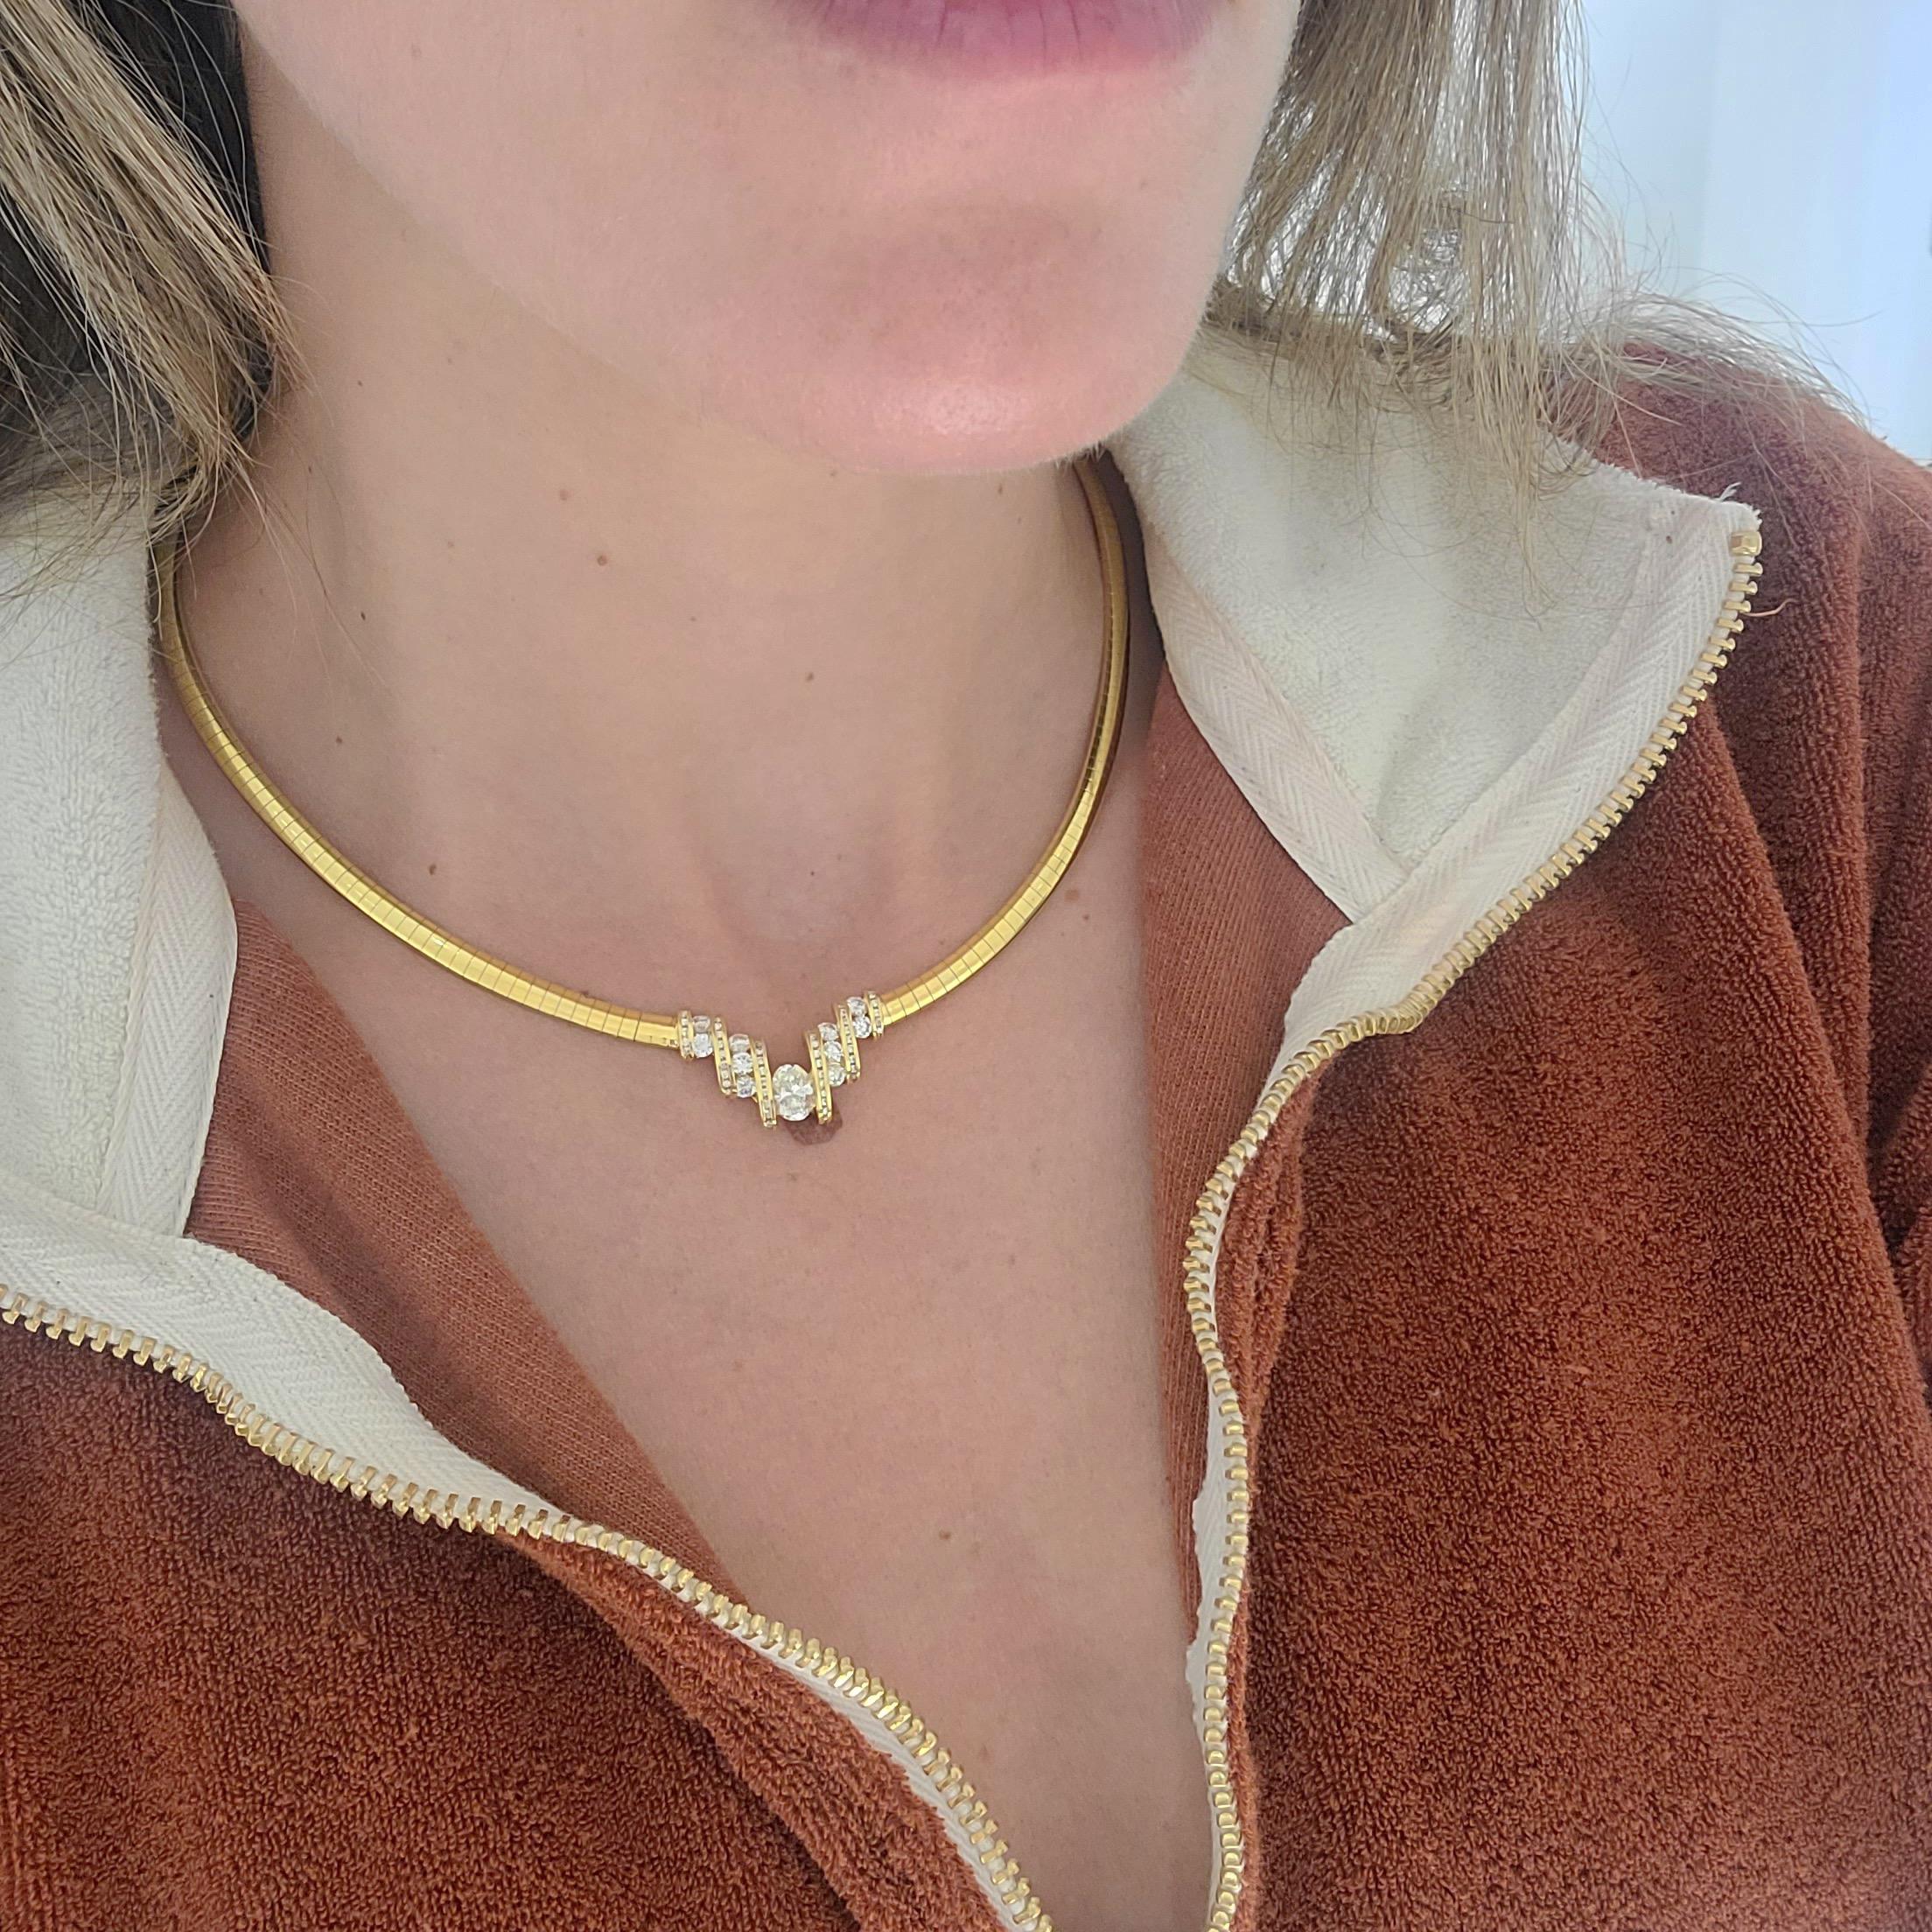 Designed by Nova, this 18 karat yellow gold choker necklace is a real showstopper. The centerpiece is the 0.85 carat oval diamond. Four rows of invisibly set round brilliant cut diamonds flank the center stone. The central motif  is set into a 16